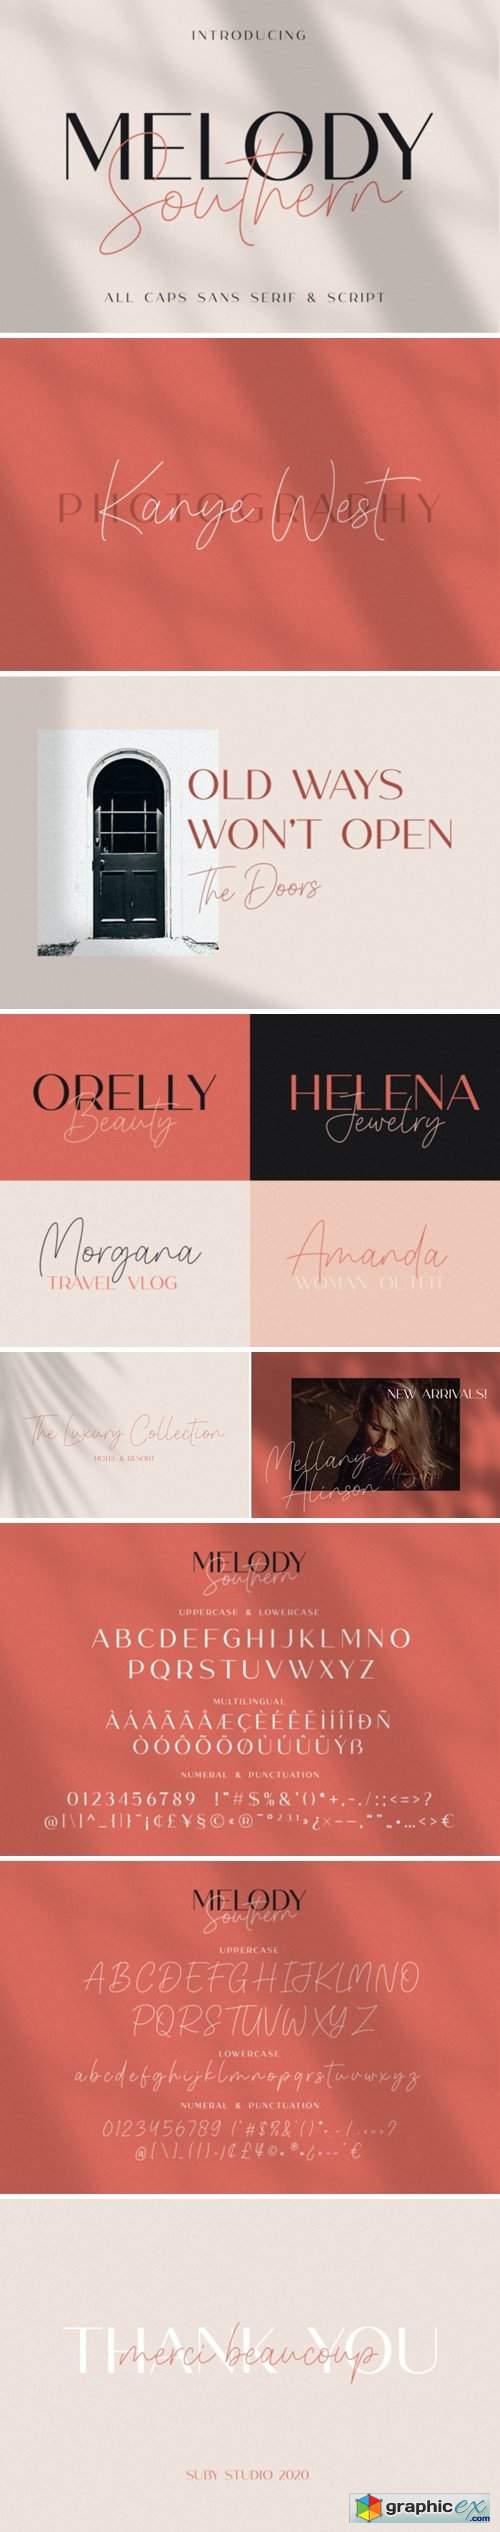  Melody Southern Duo Font 